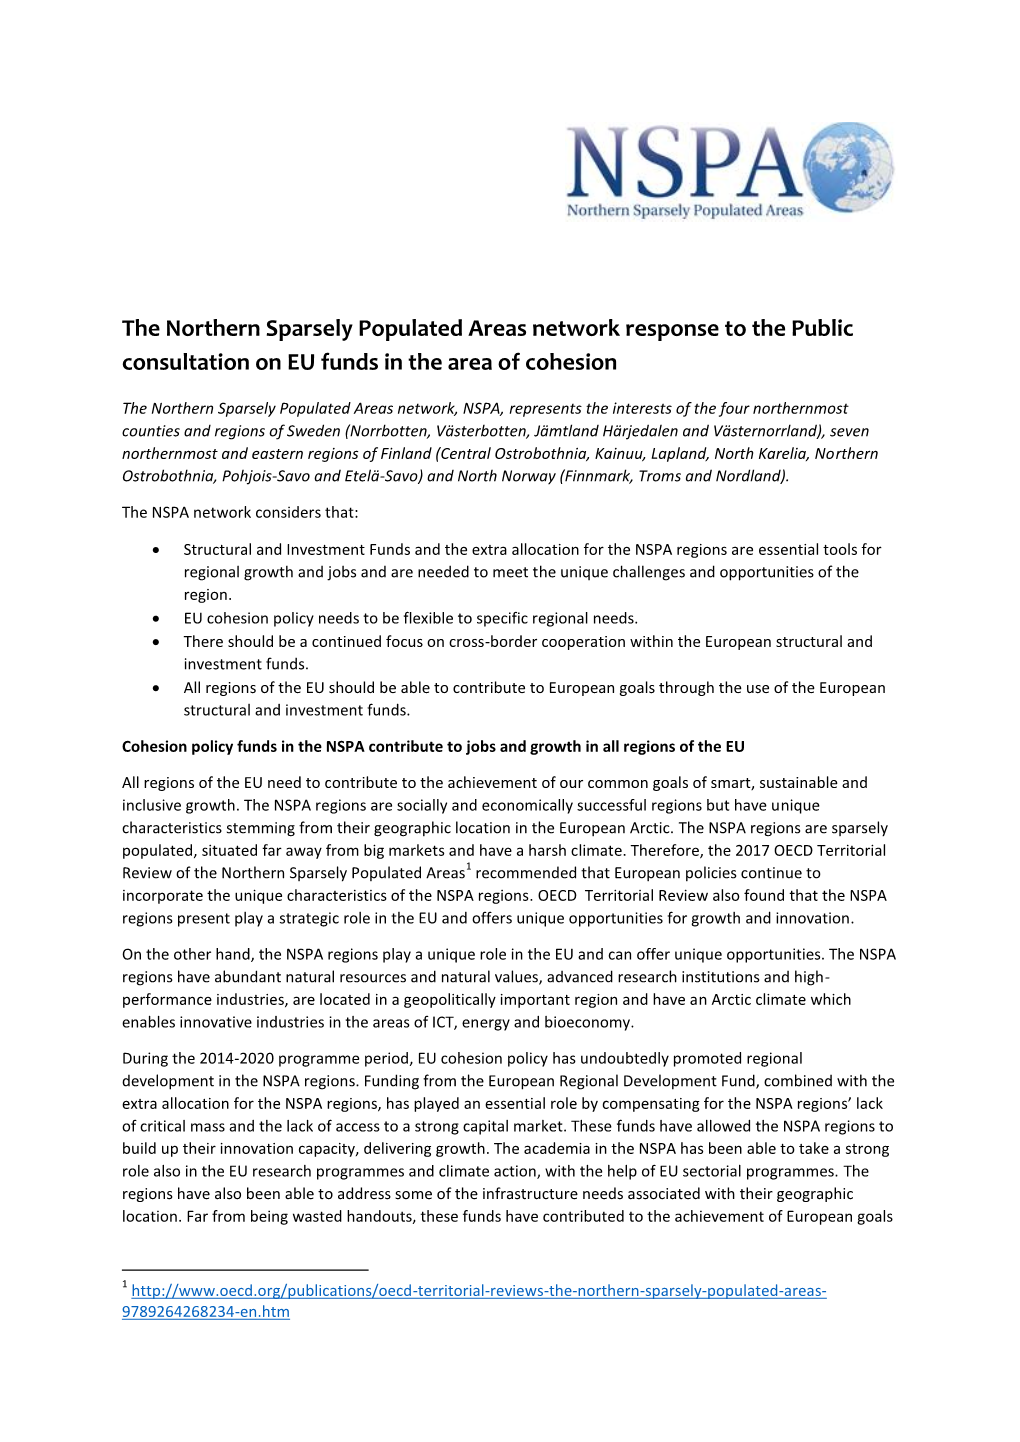 The Northern Sparsely Populated Areas Network Response to the Public Consultation on EU Funds in the Area of Cohesion